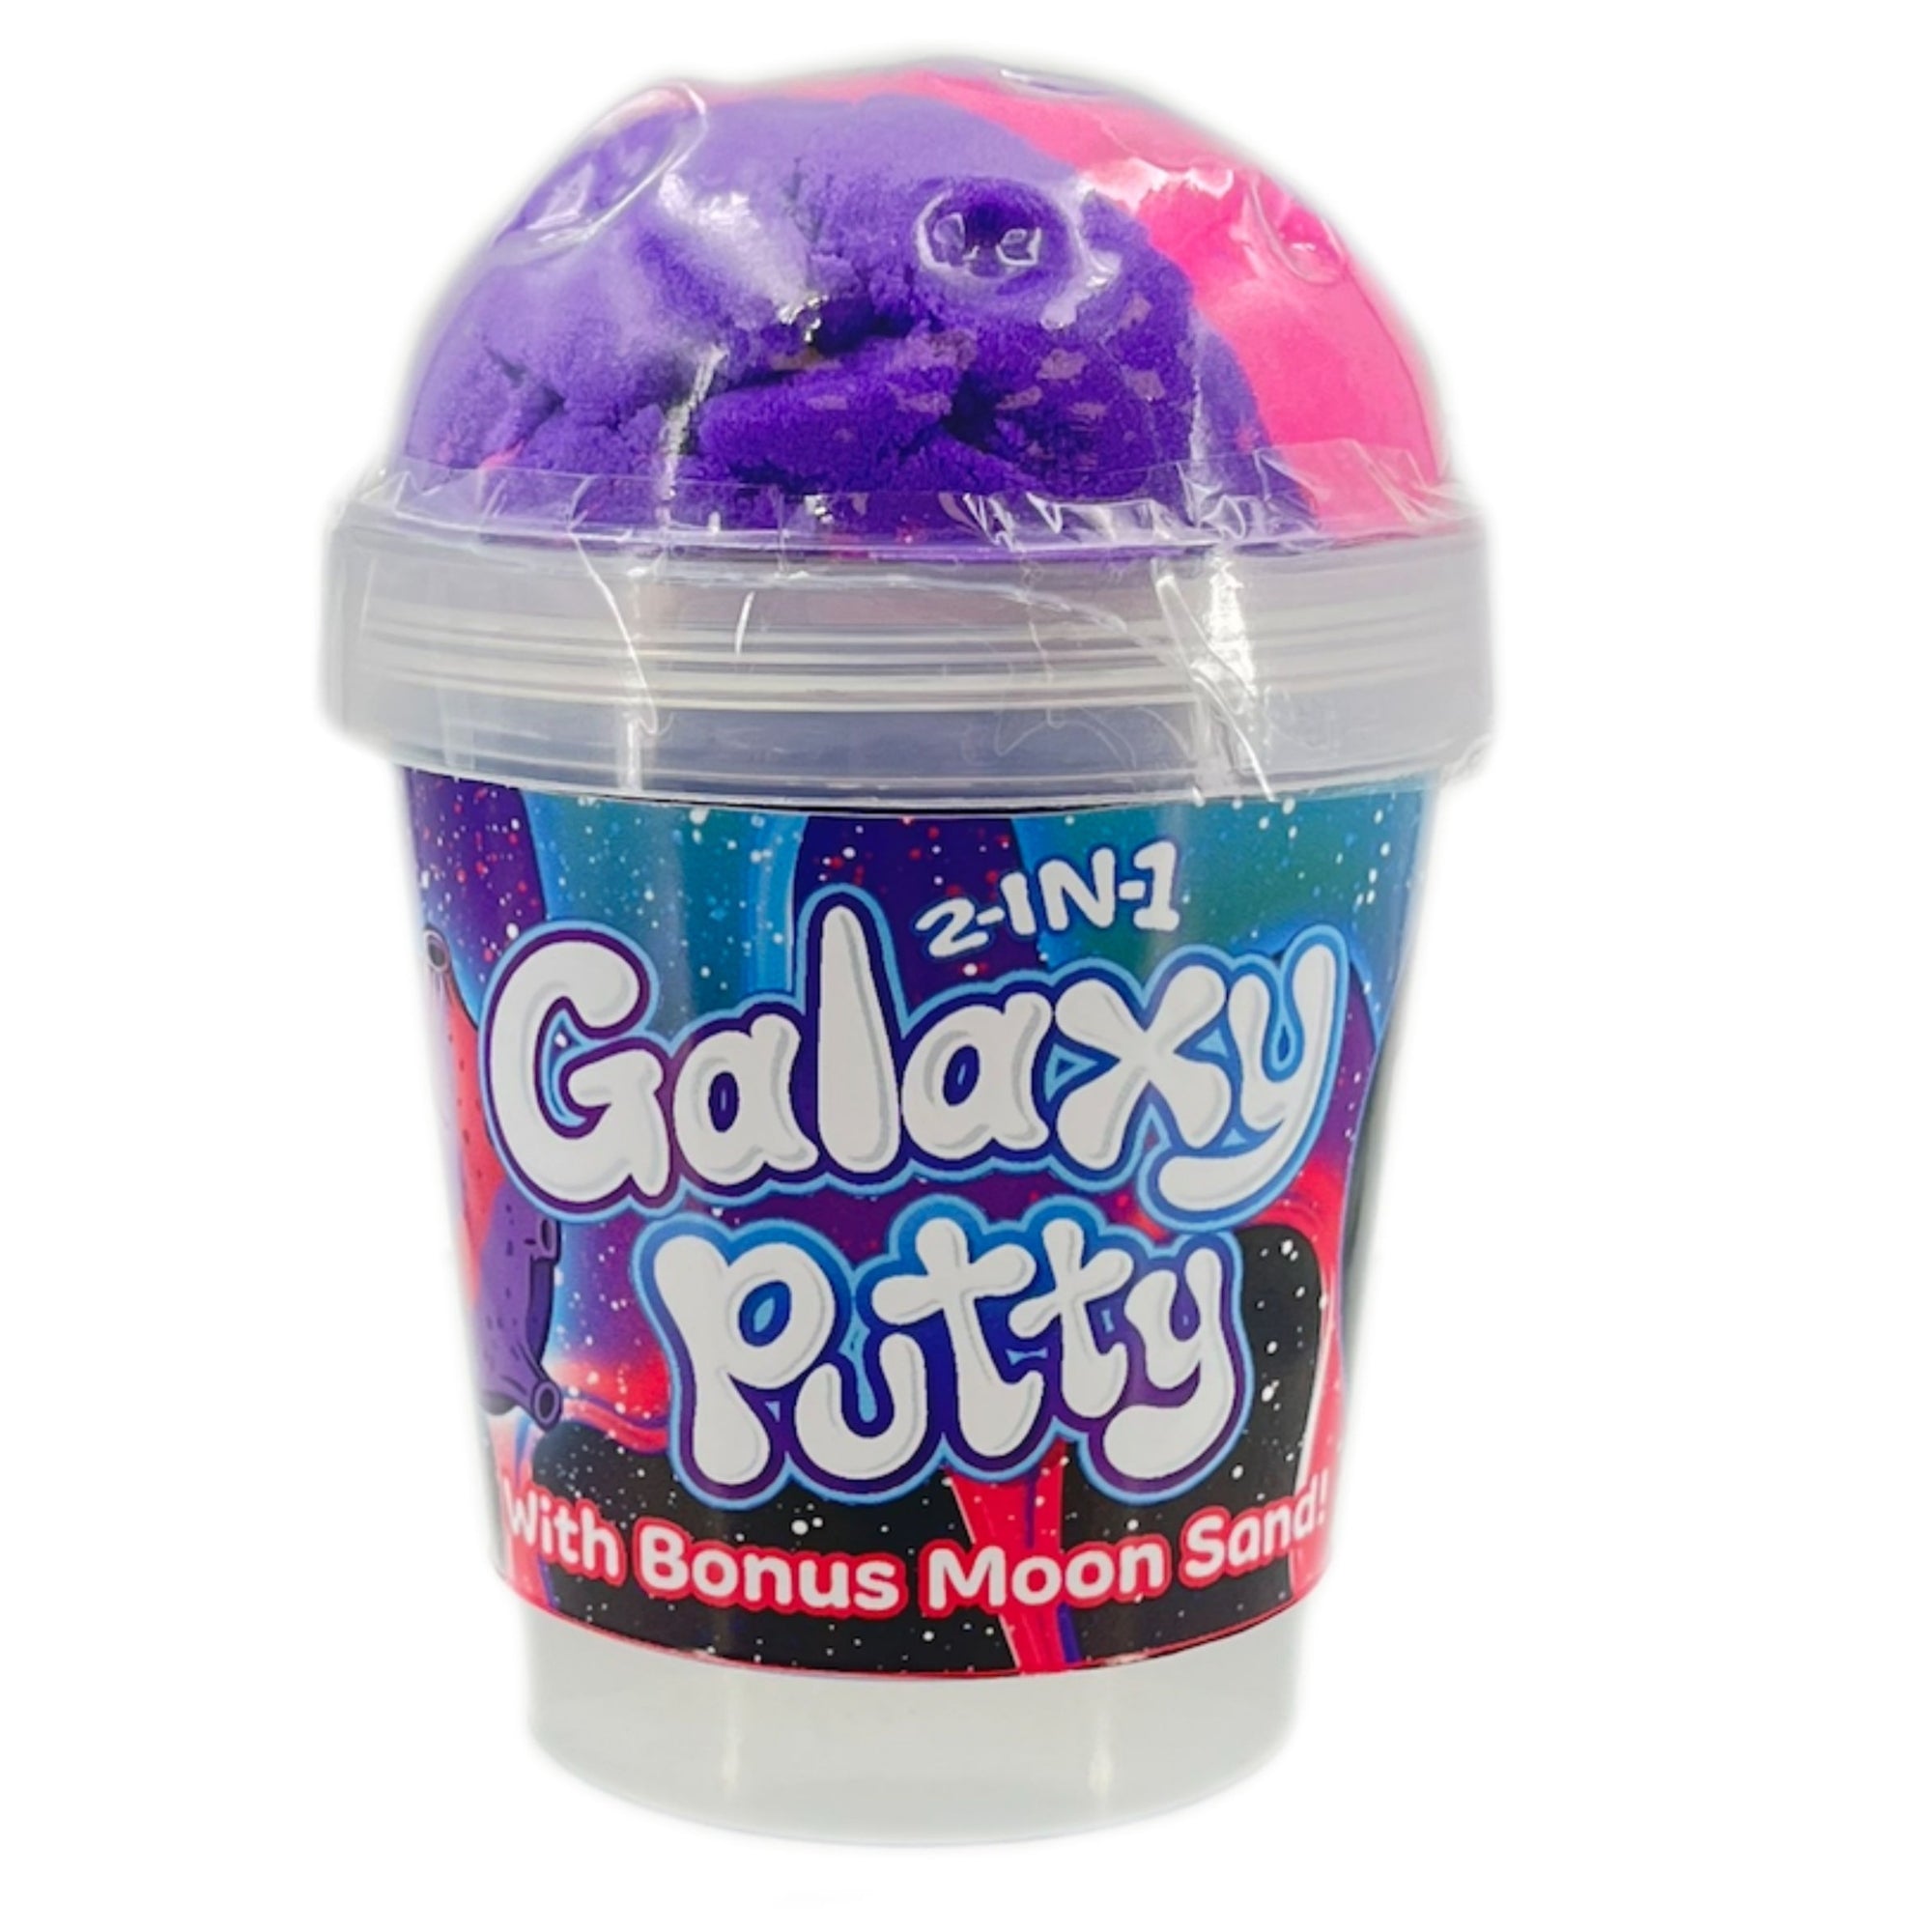 Galaxy Putty & Moon Sand, The 2-in-1 Galaxy Putty & Moon Sand is the perfect toy for kids who love space and creativity! This incredible product combines the fun and stretchability of putty with the soft and fluffy texture of moon sand, allowing kids to create amazing space landscapes like never before.With its vibrant colors and unique texture, this multi-colored space putty is truly out of this world. Kids can stretch it, mold it, and shape it however they want, letting their imagination run wild as they 